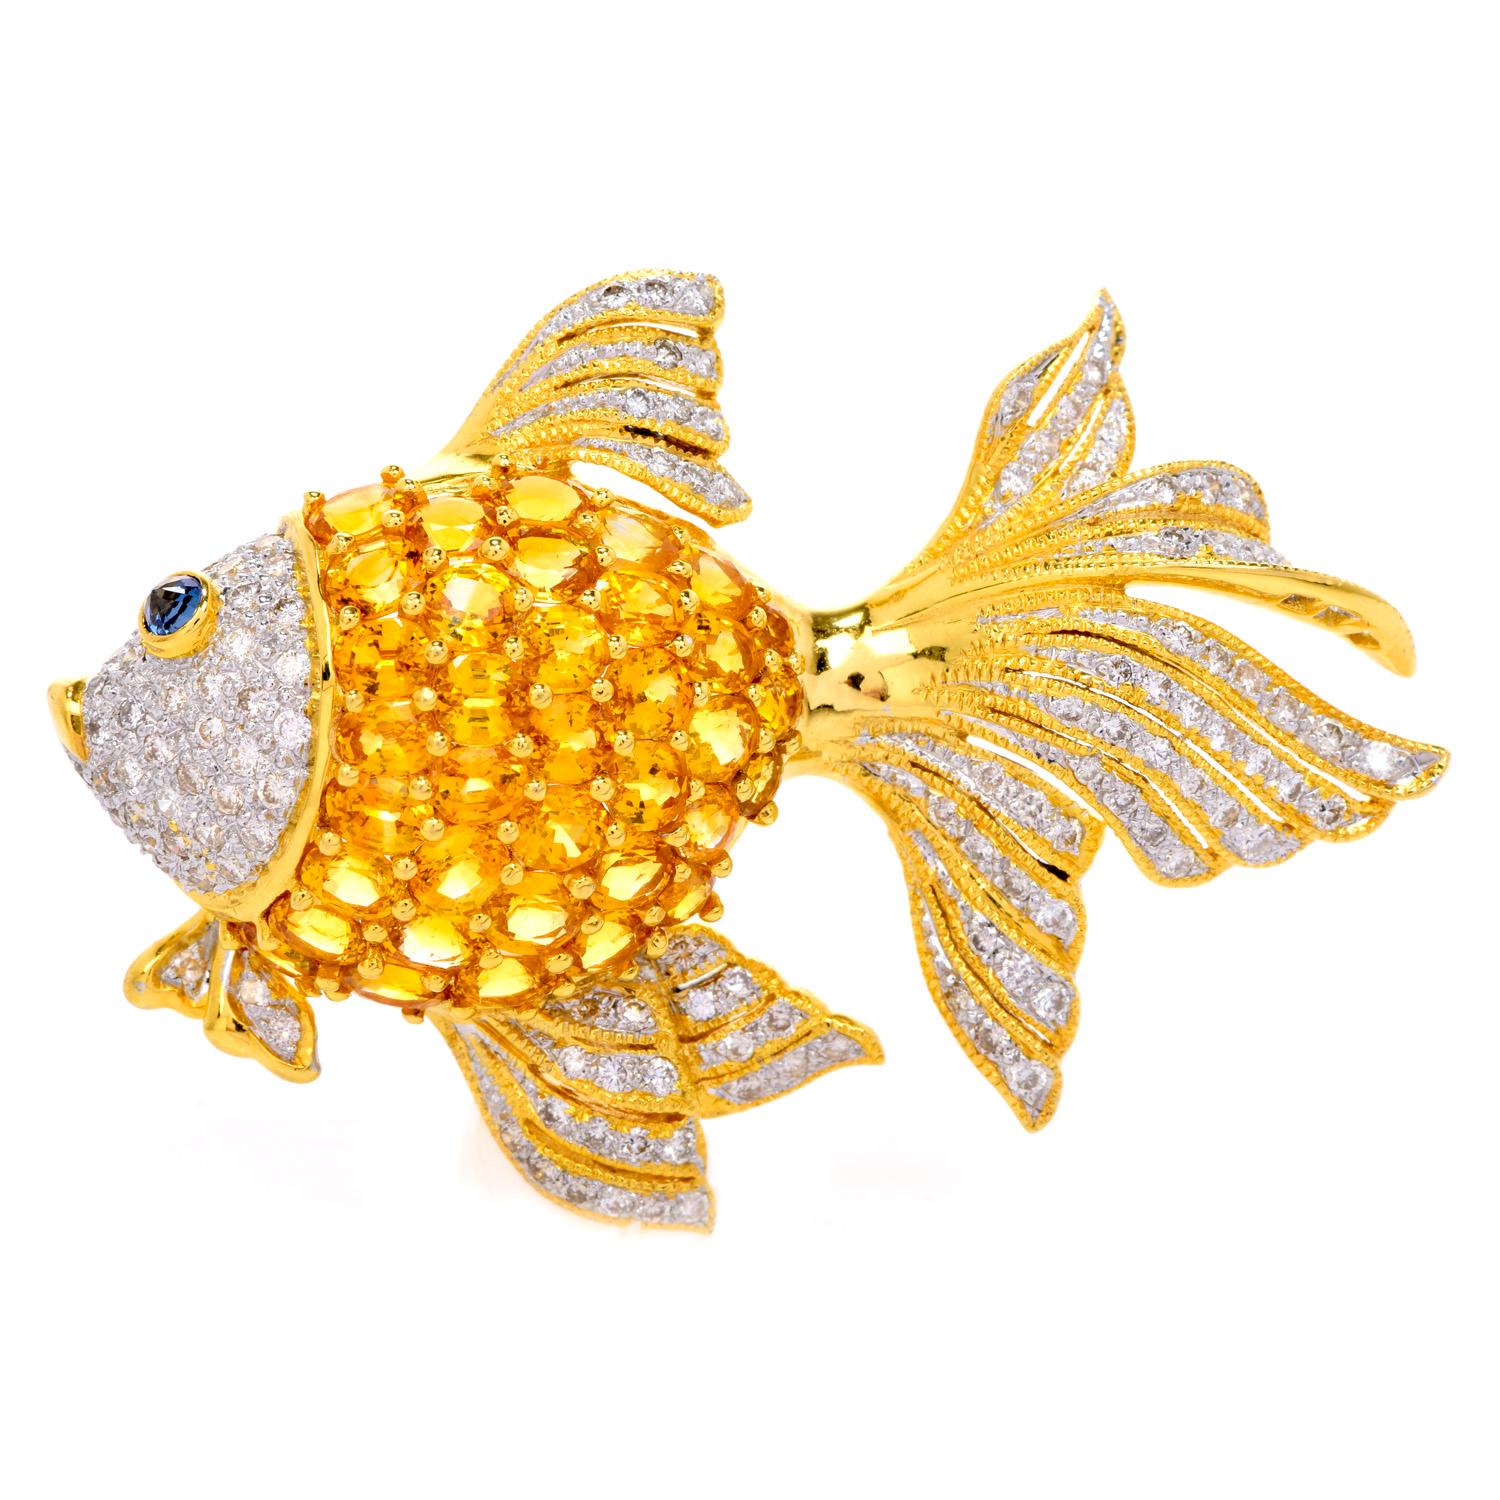 A Gold FISH Pin Made of GOLD!

witness the true beauty of this astounding literal Gold-Fish Inspired Gold Brooch.

Large soft curved design & high sparkle, crafted in bold 18K yellow gold with white gold accents, this fish brooch measures appx.